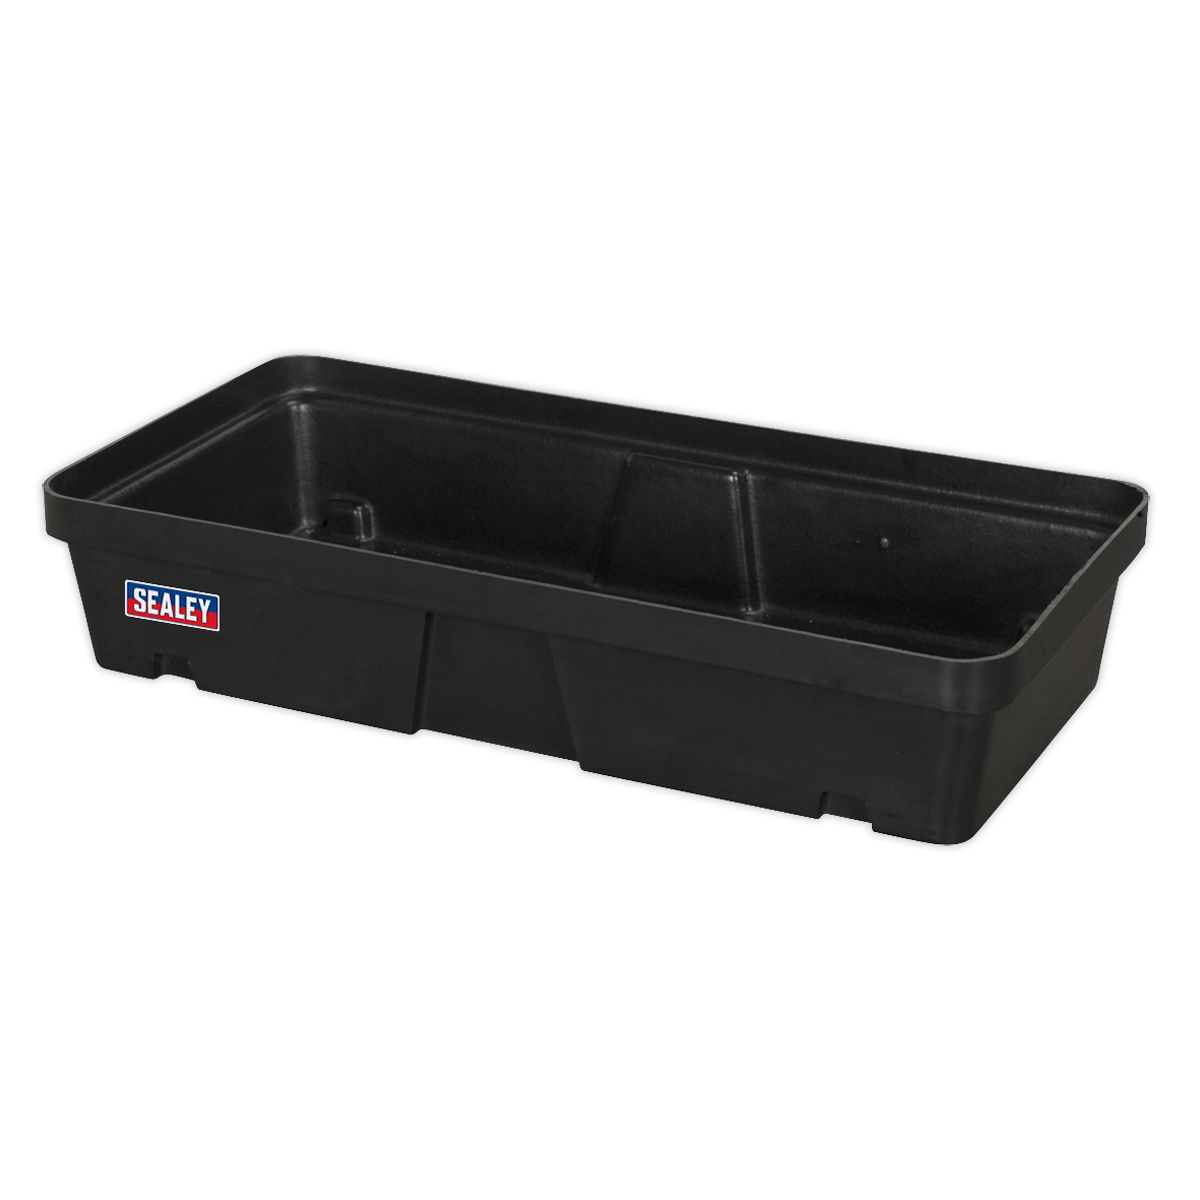 SEALEY - DRP30 Spill Tray 30L